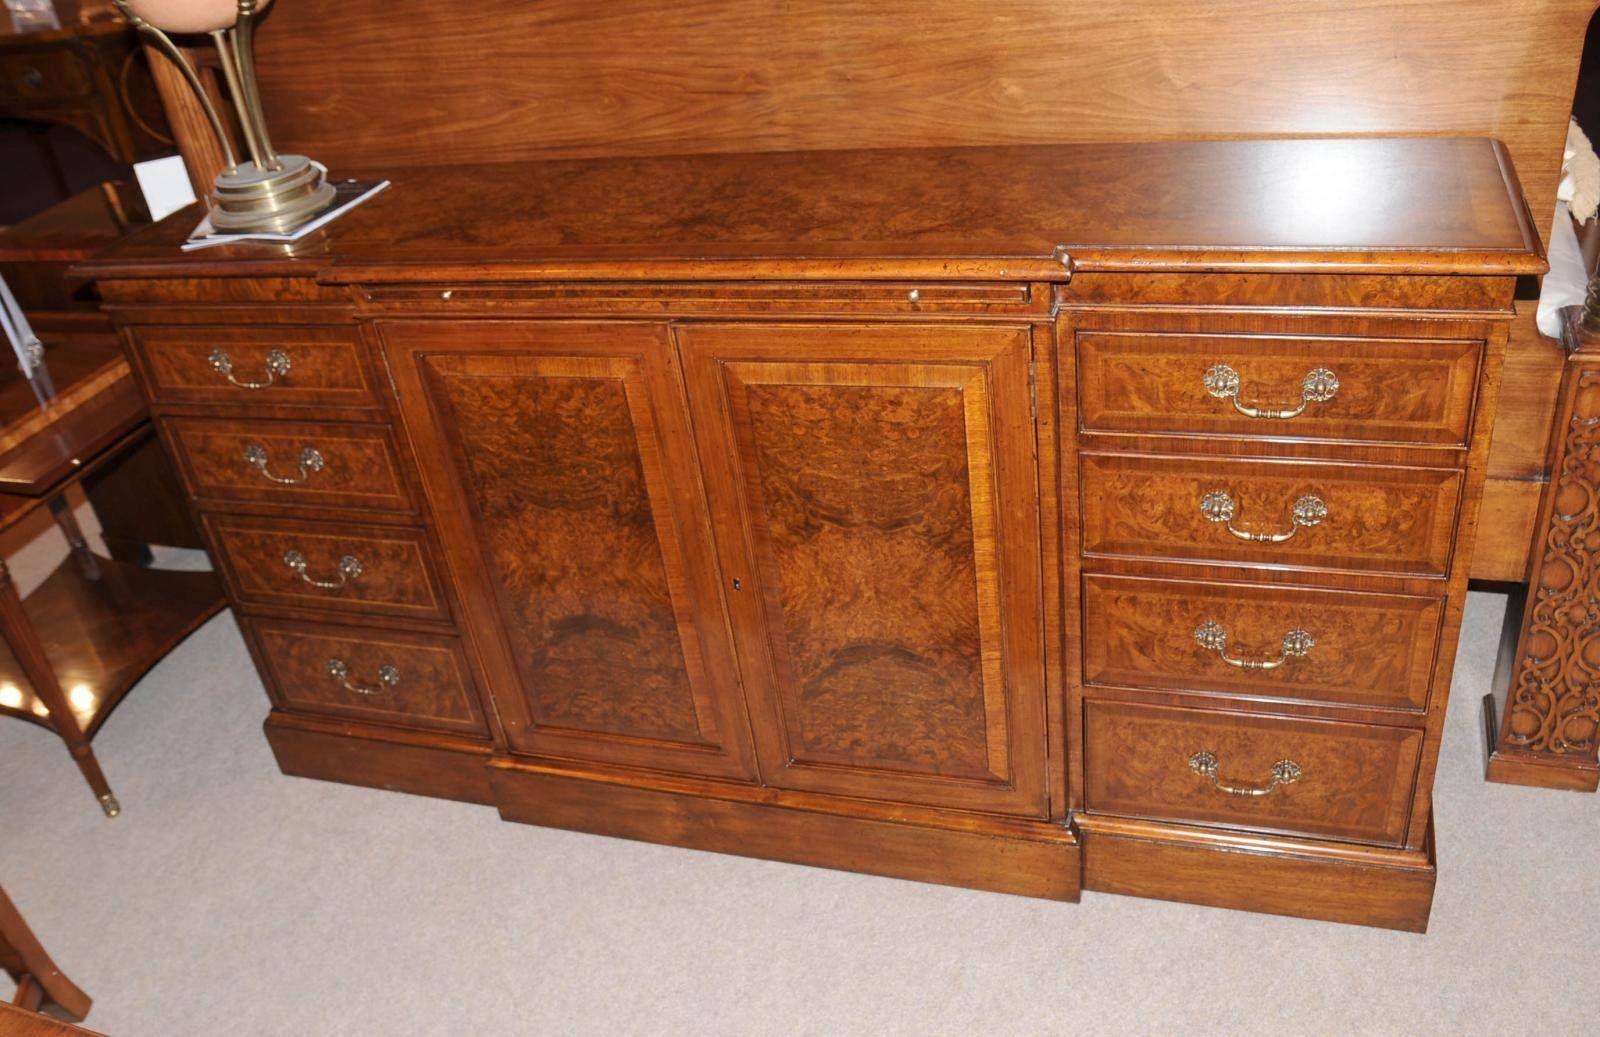 Edwardian Walnut Sideboard Buffet Server Dining Furniture | Ebay With Most Recently Released Dining Room Servers And Sideboards (View 12 of 15)